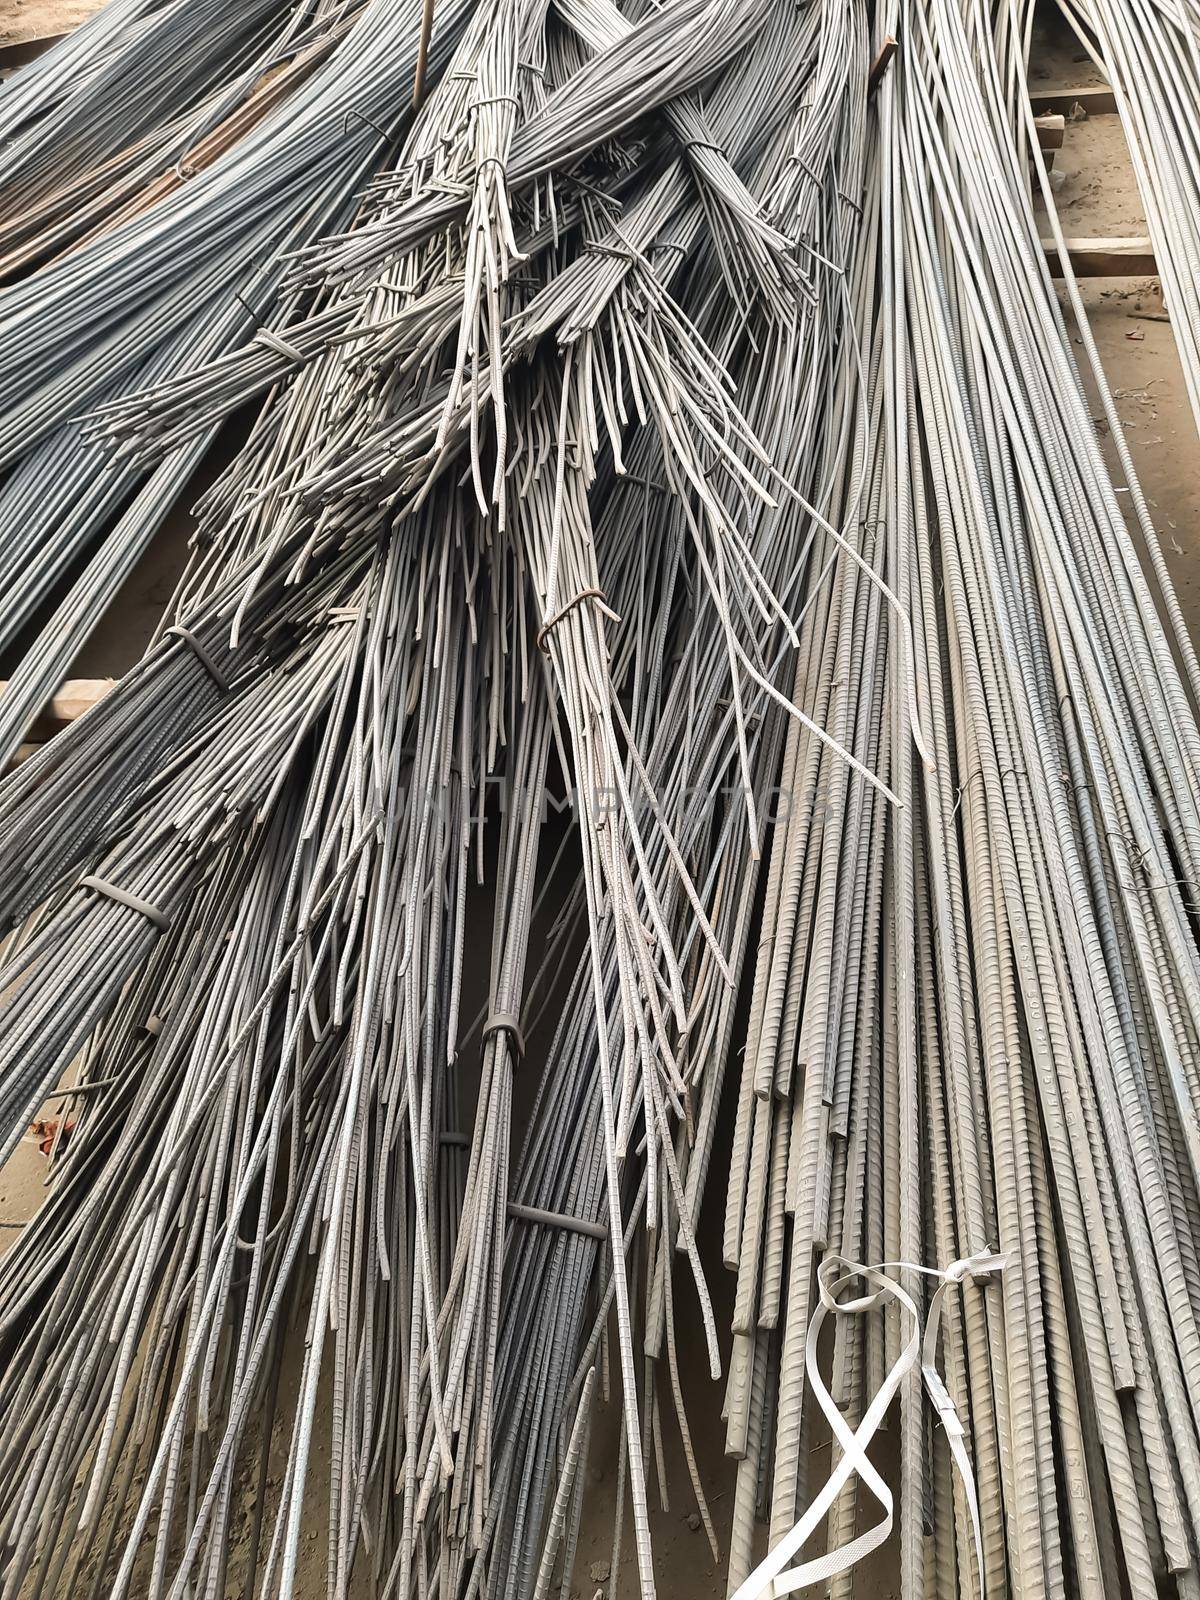 close up steel bar or steel reinforcement bar in the construction site with sunbeam at the morning, steel rods bars can use for reinforce concrete. by tabishere